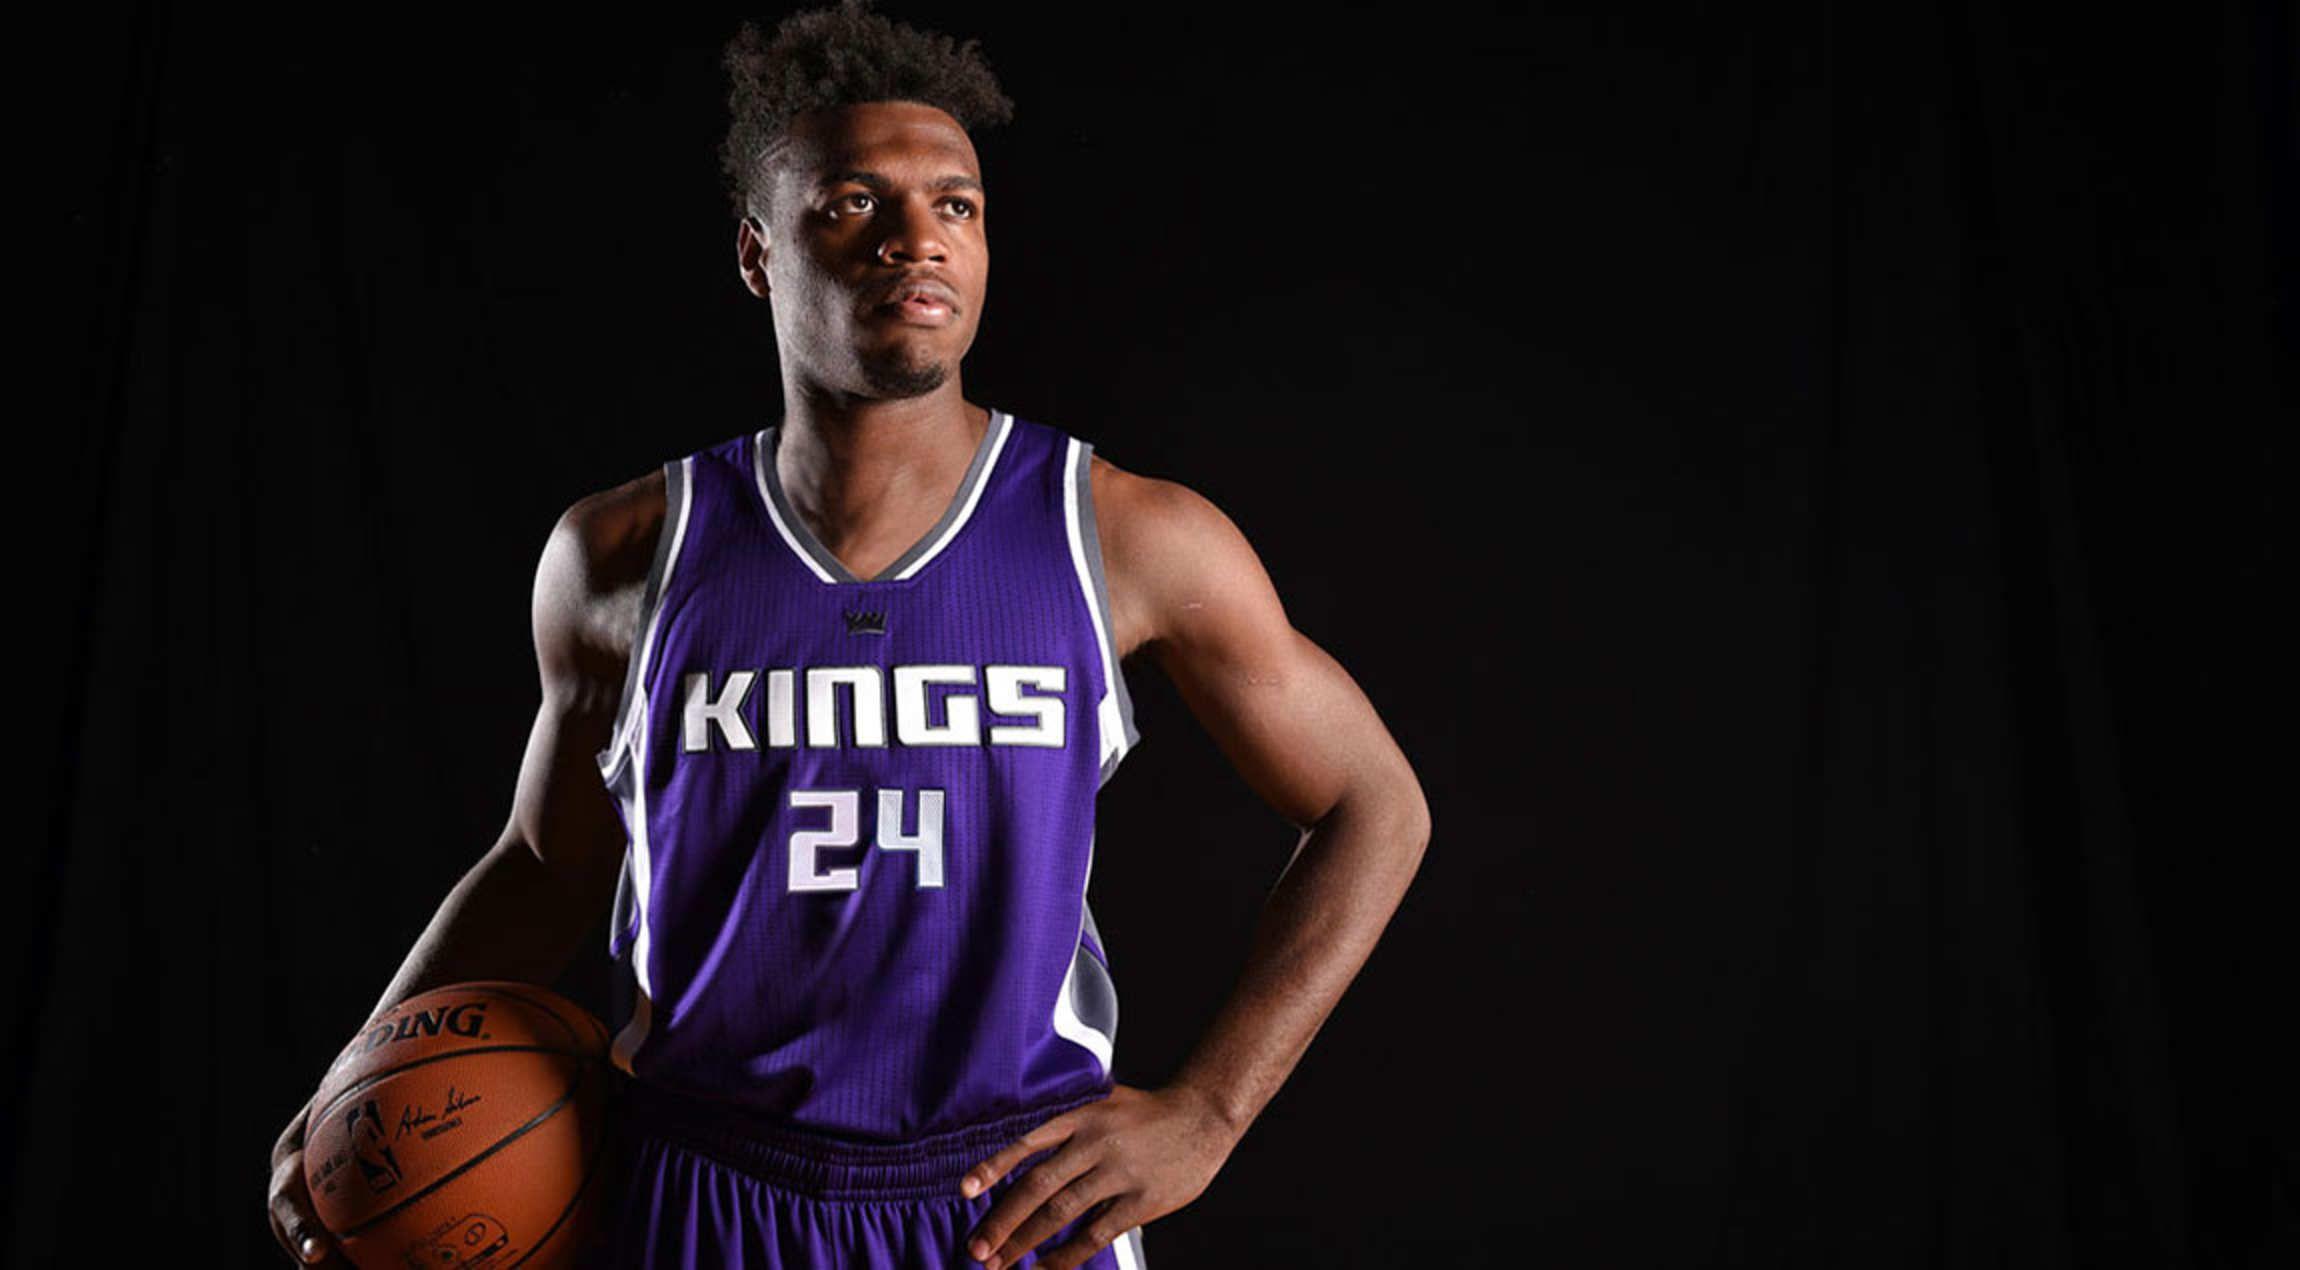 Quiz: How well do you know Buddy Hield?